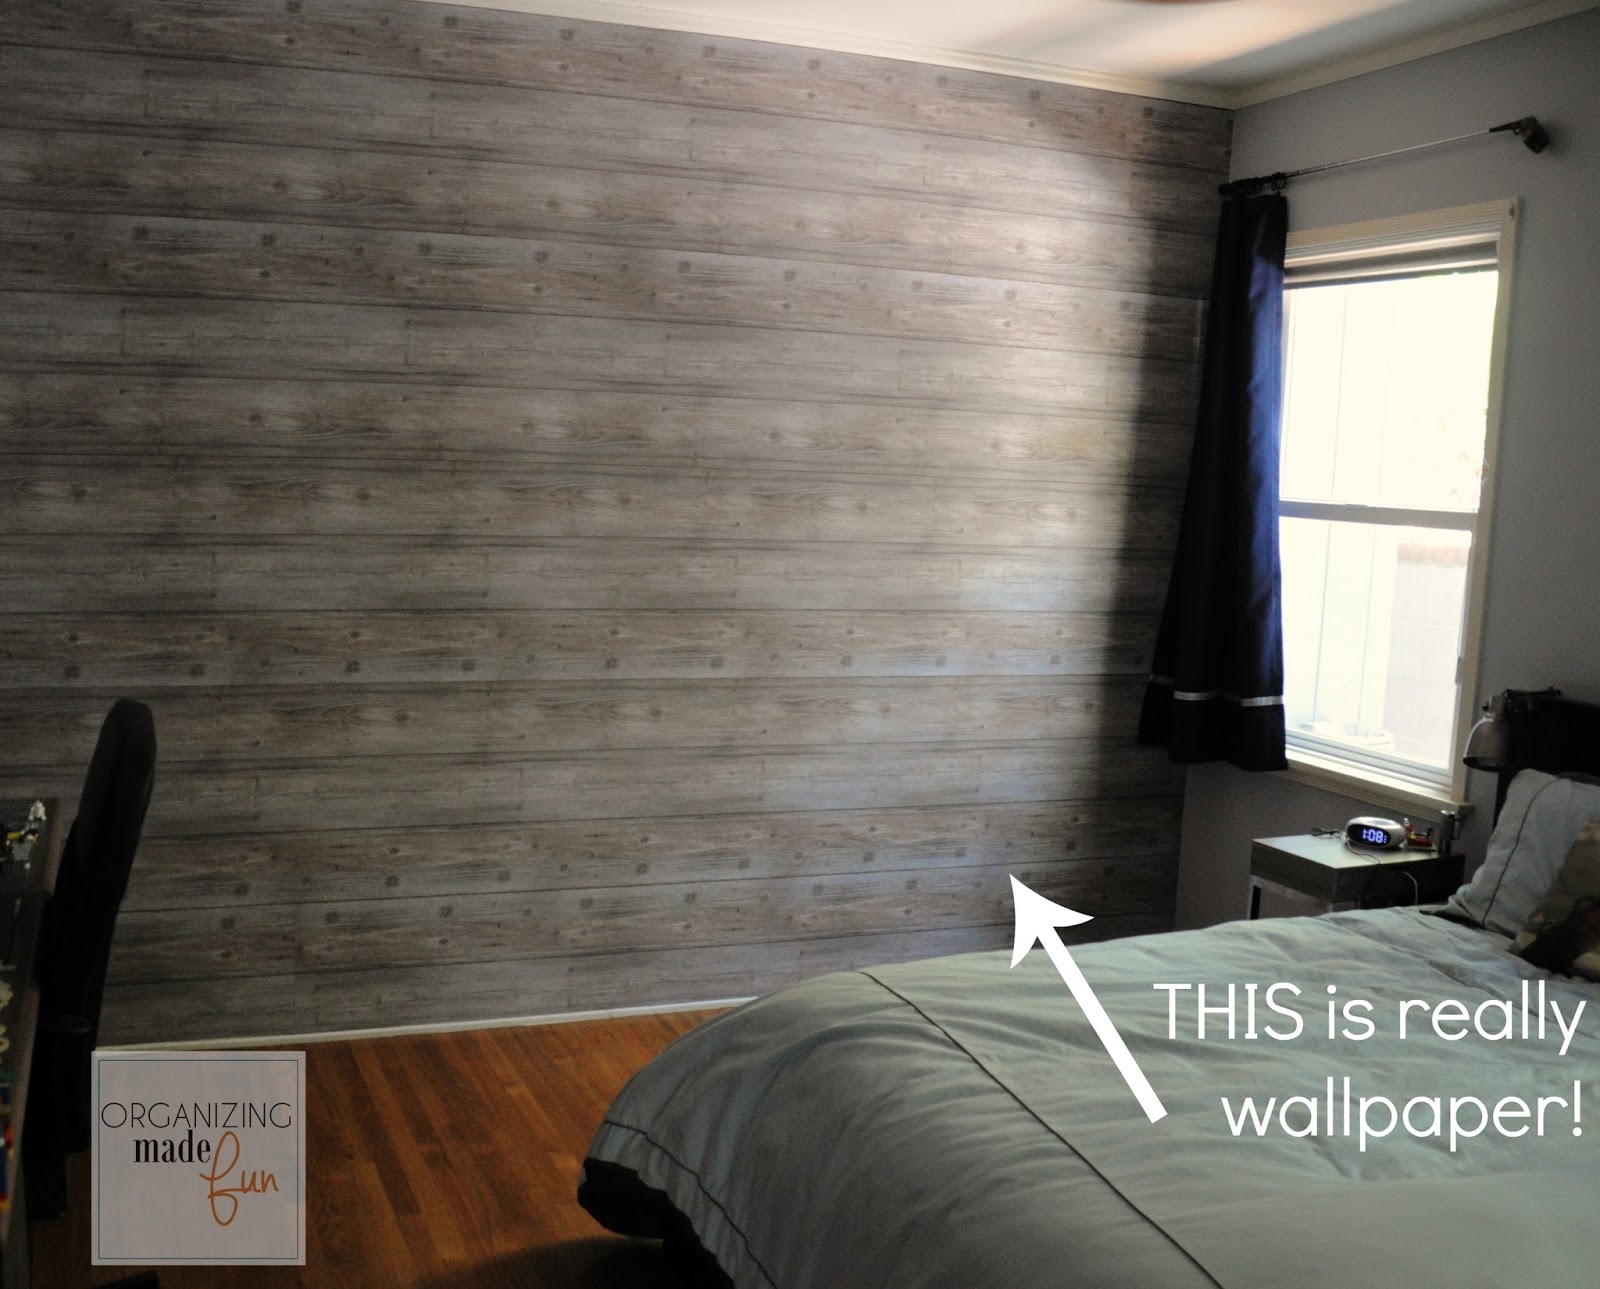 wallpaper that looks like wood paneling,room,wall,bedroom,property,interior design